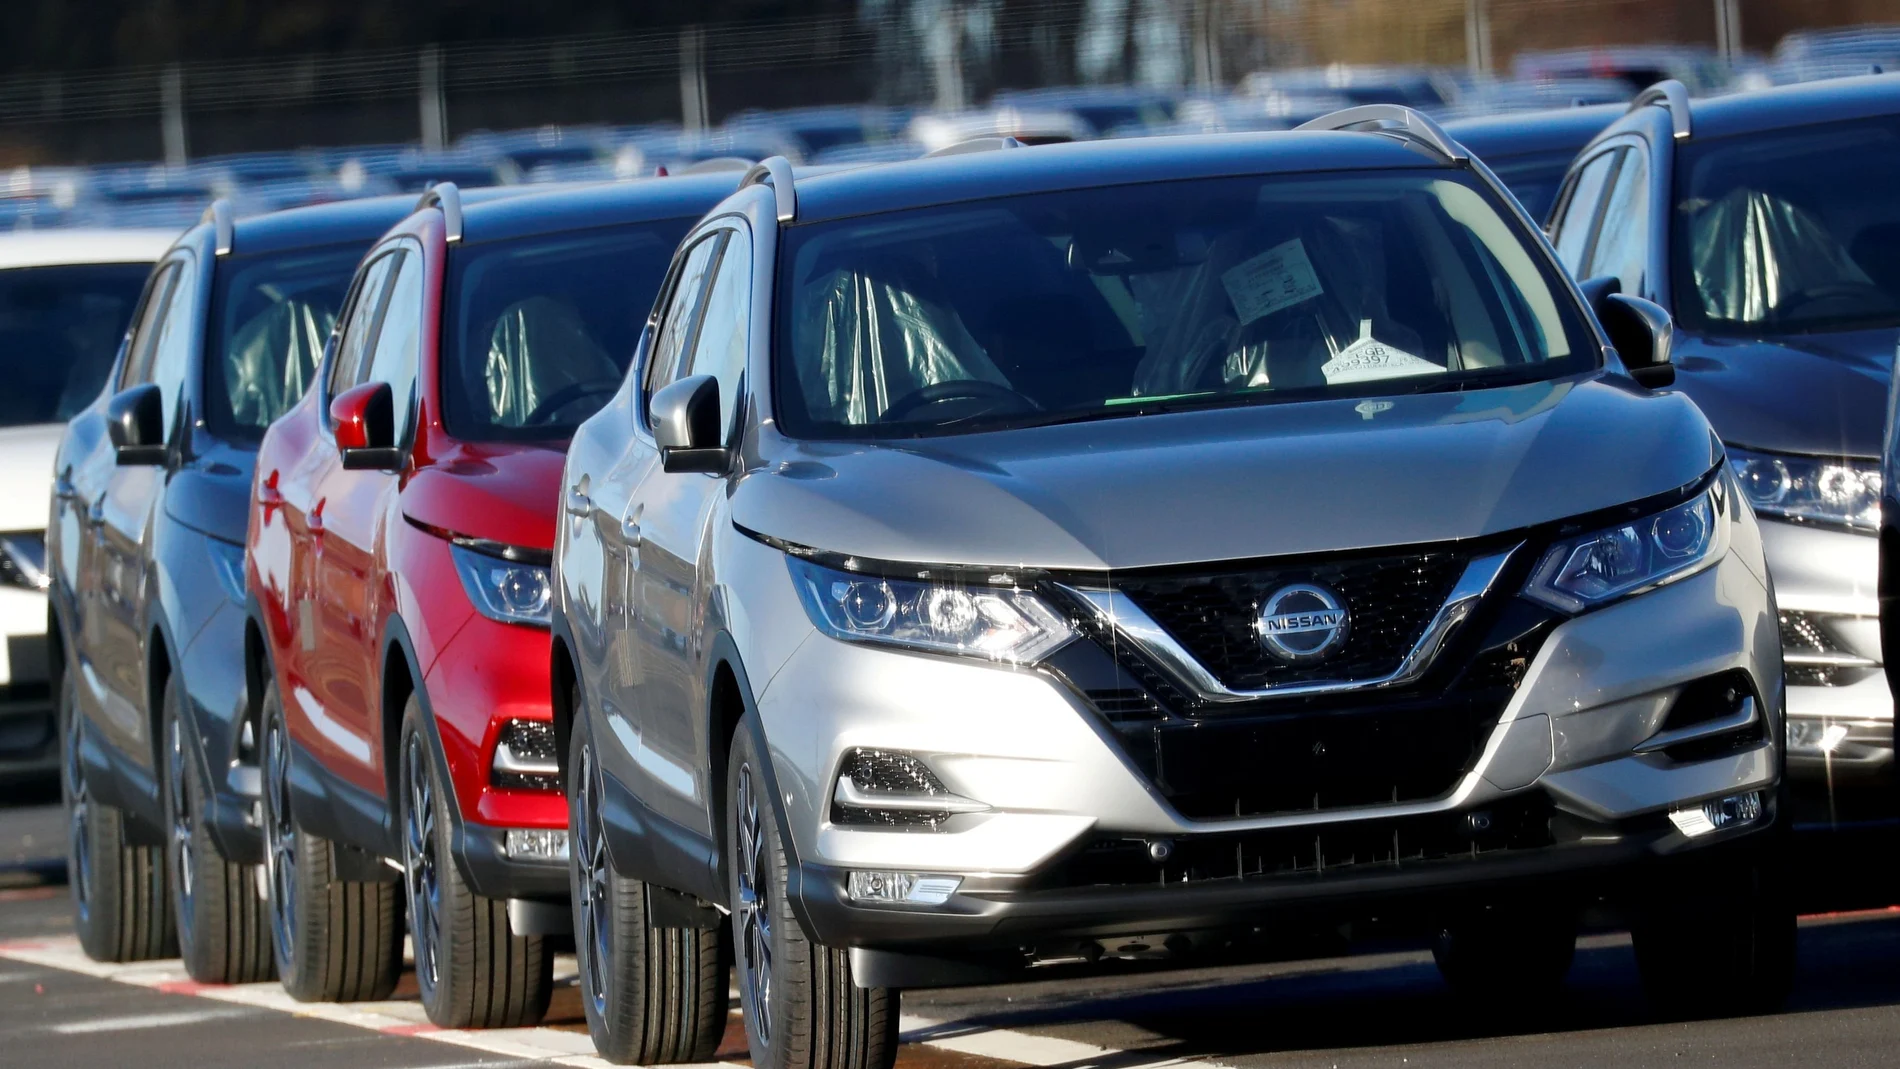 FILE PHOTO: Qashqai cars by Nissan are seen parked at the Nissan car plant in Sunderland